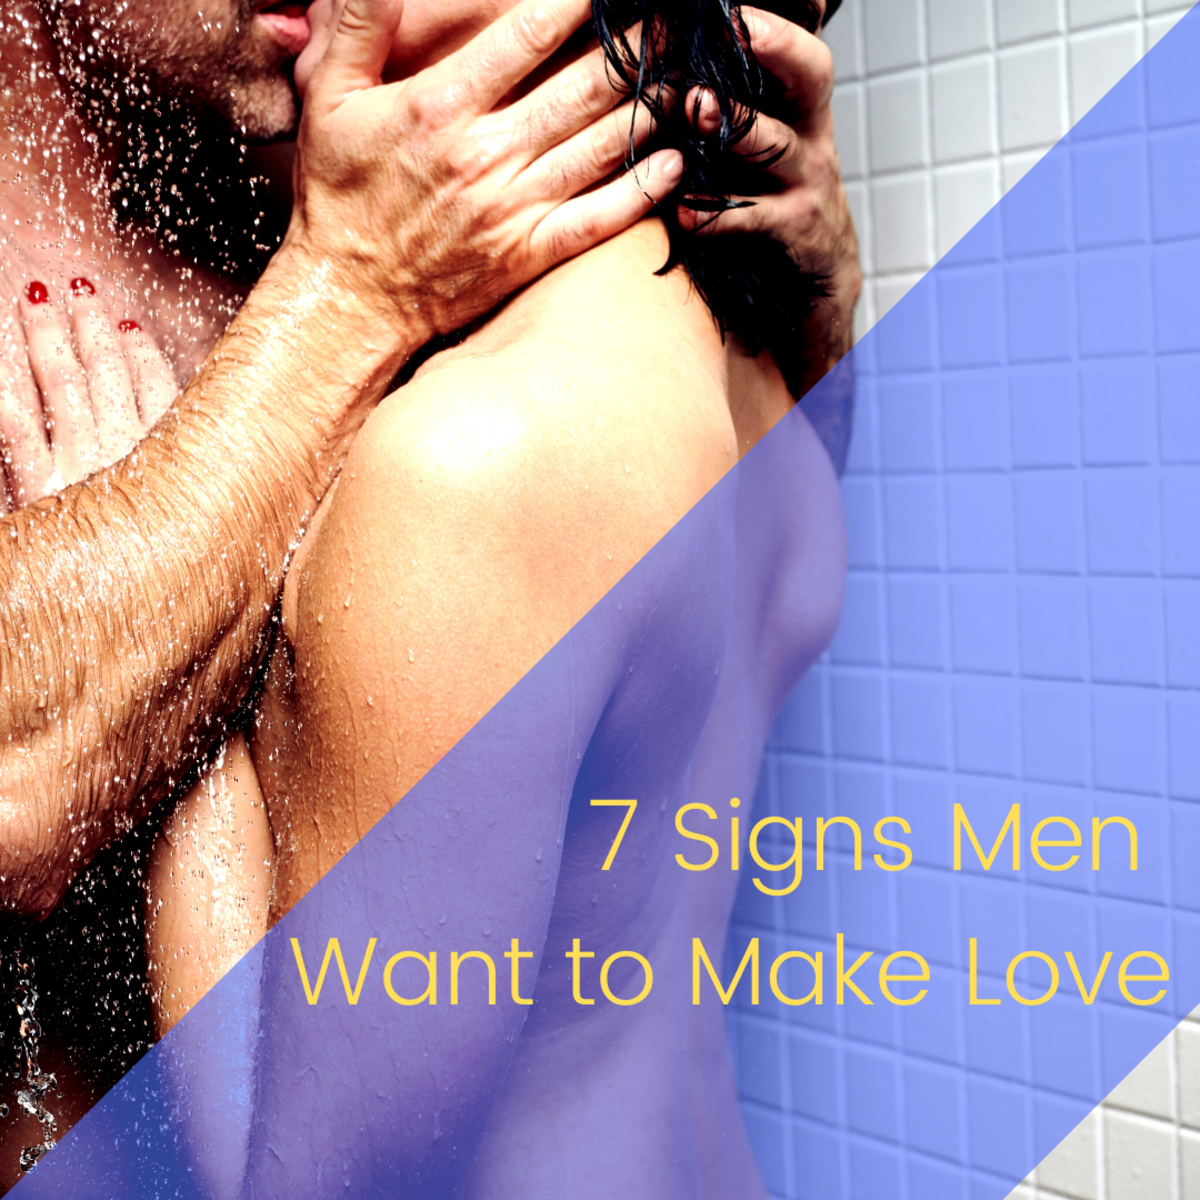 7 Signs Men Want to Make Love